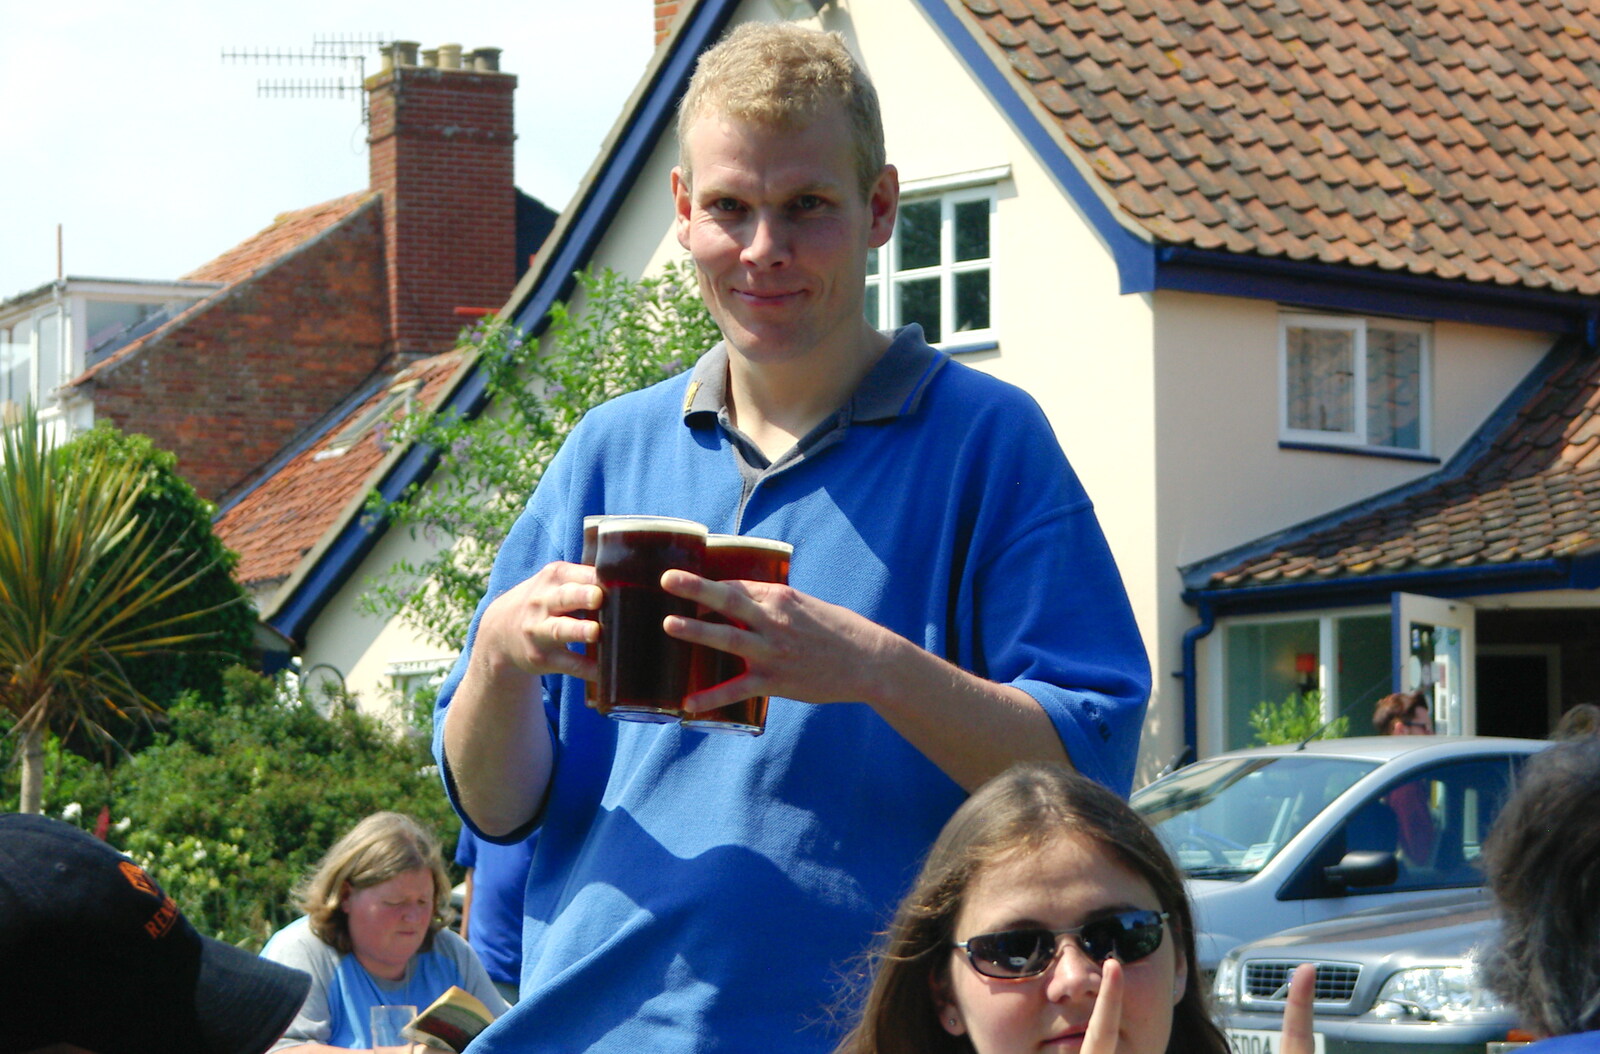 Bill brings some pints back from the bar from The BSCC Charity Bike Ride, Walberswick, Suffolk - 9th July 2005